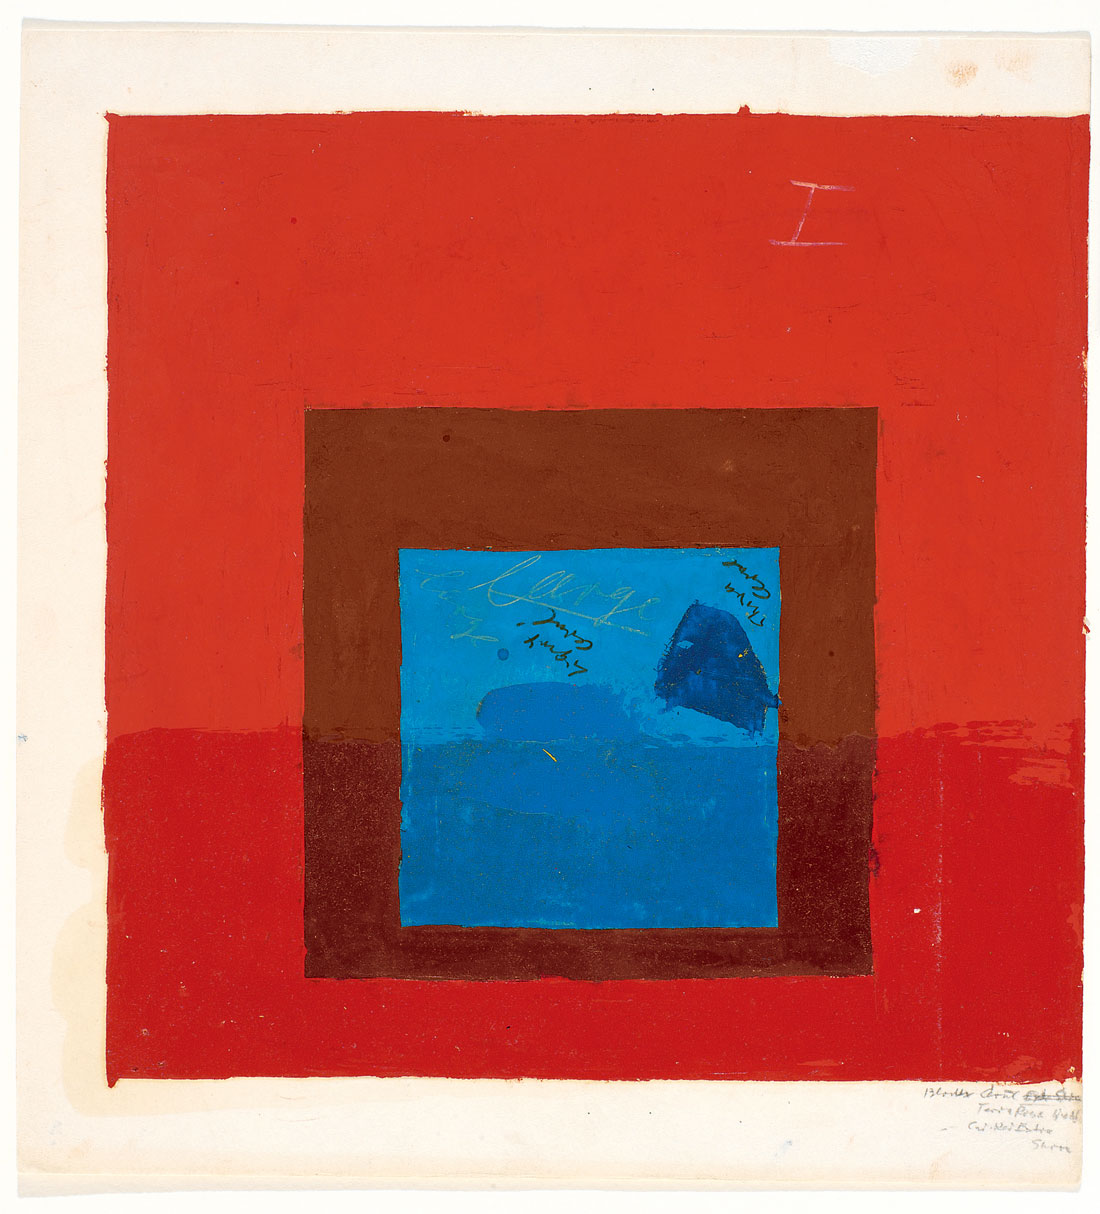 Josef Albers - Color Study for Homage to the Square